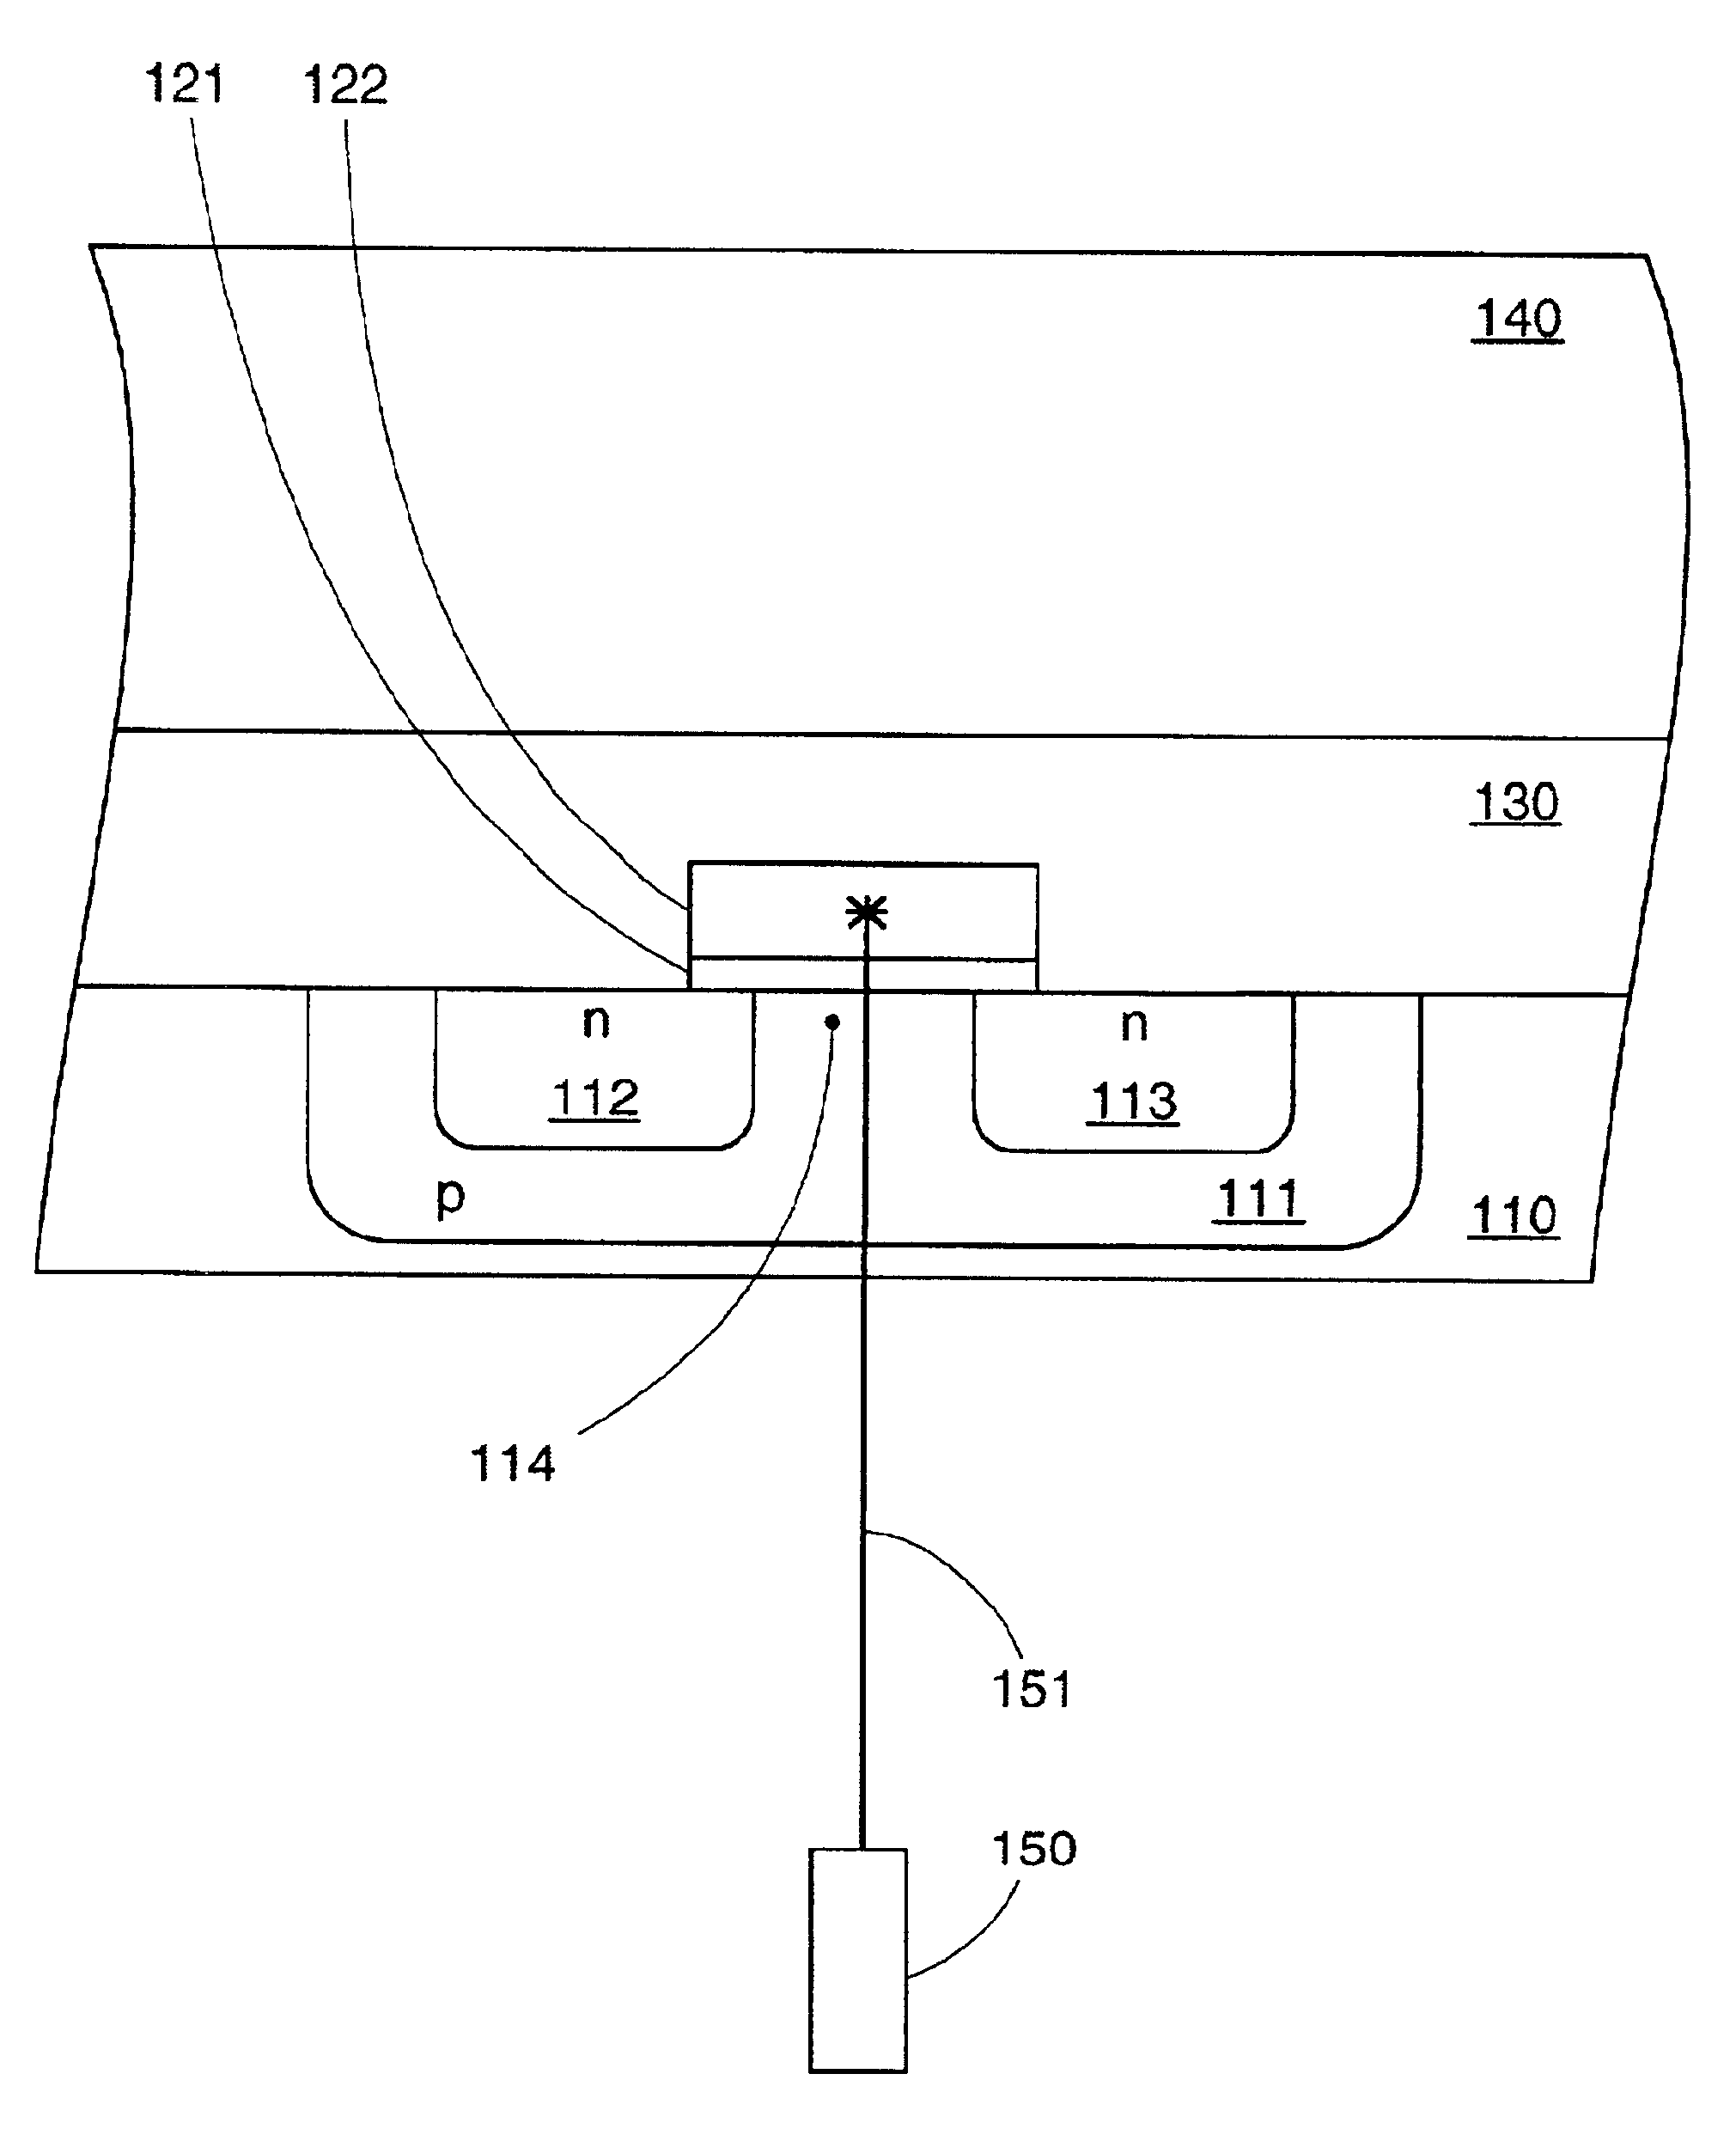 Method to produce a factory programmable IC using standard IC wafers and the structure